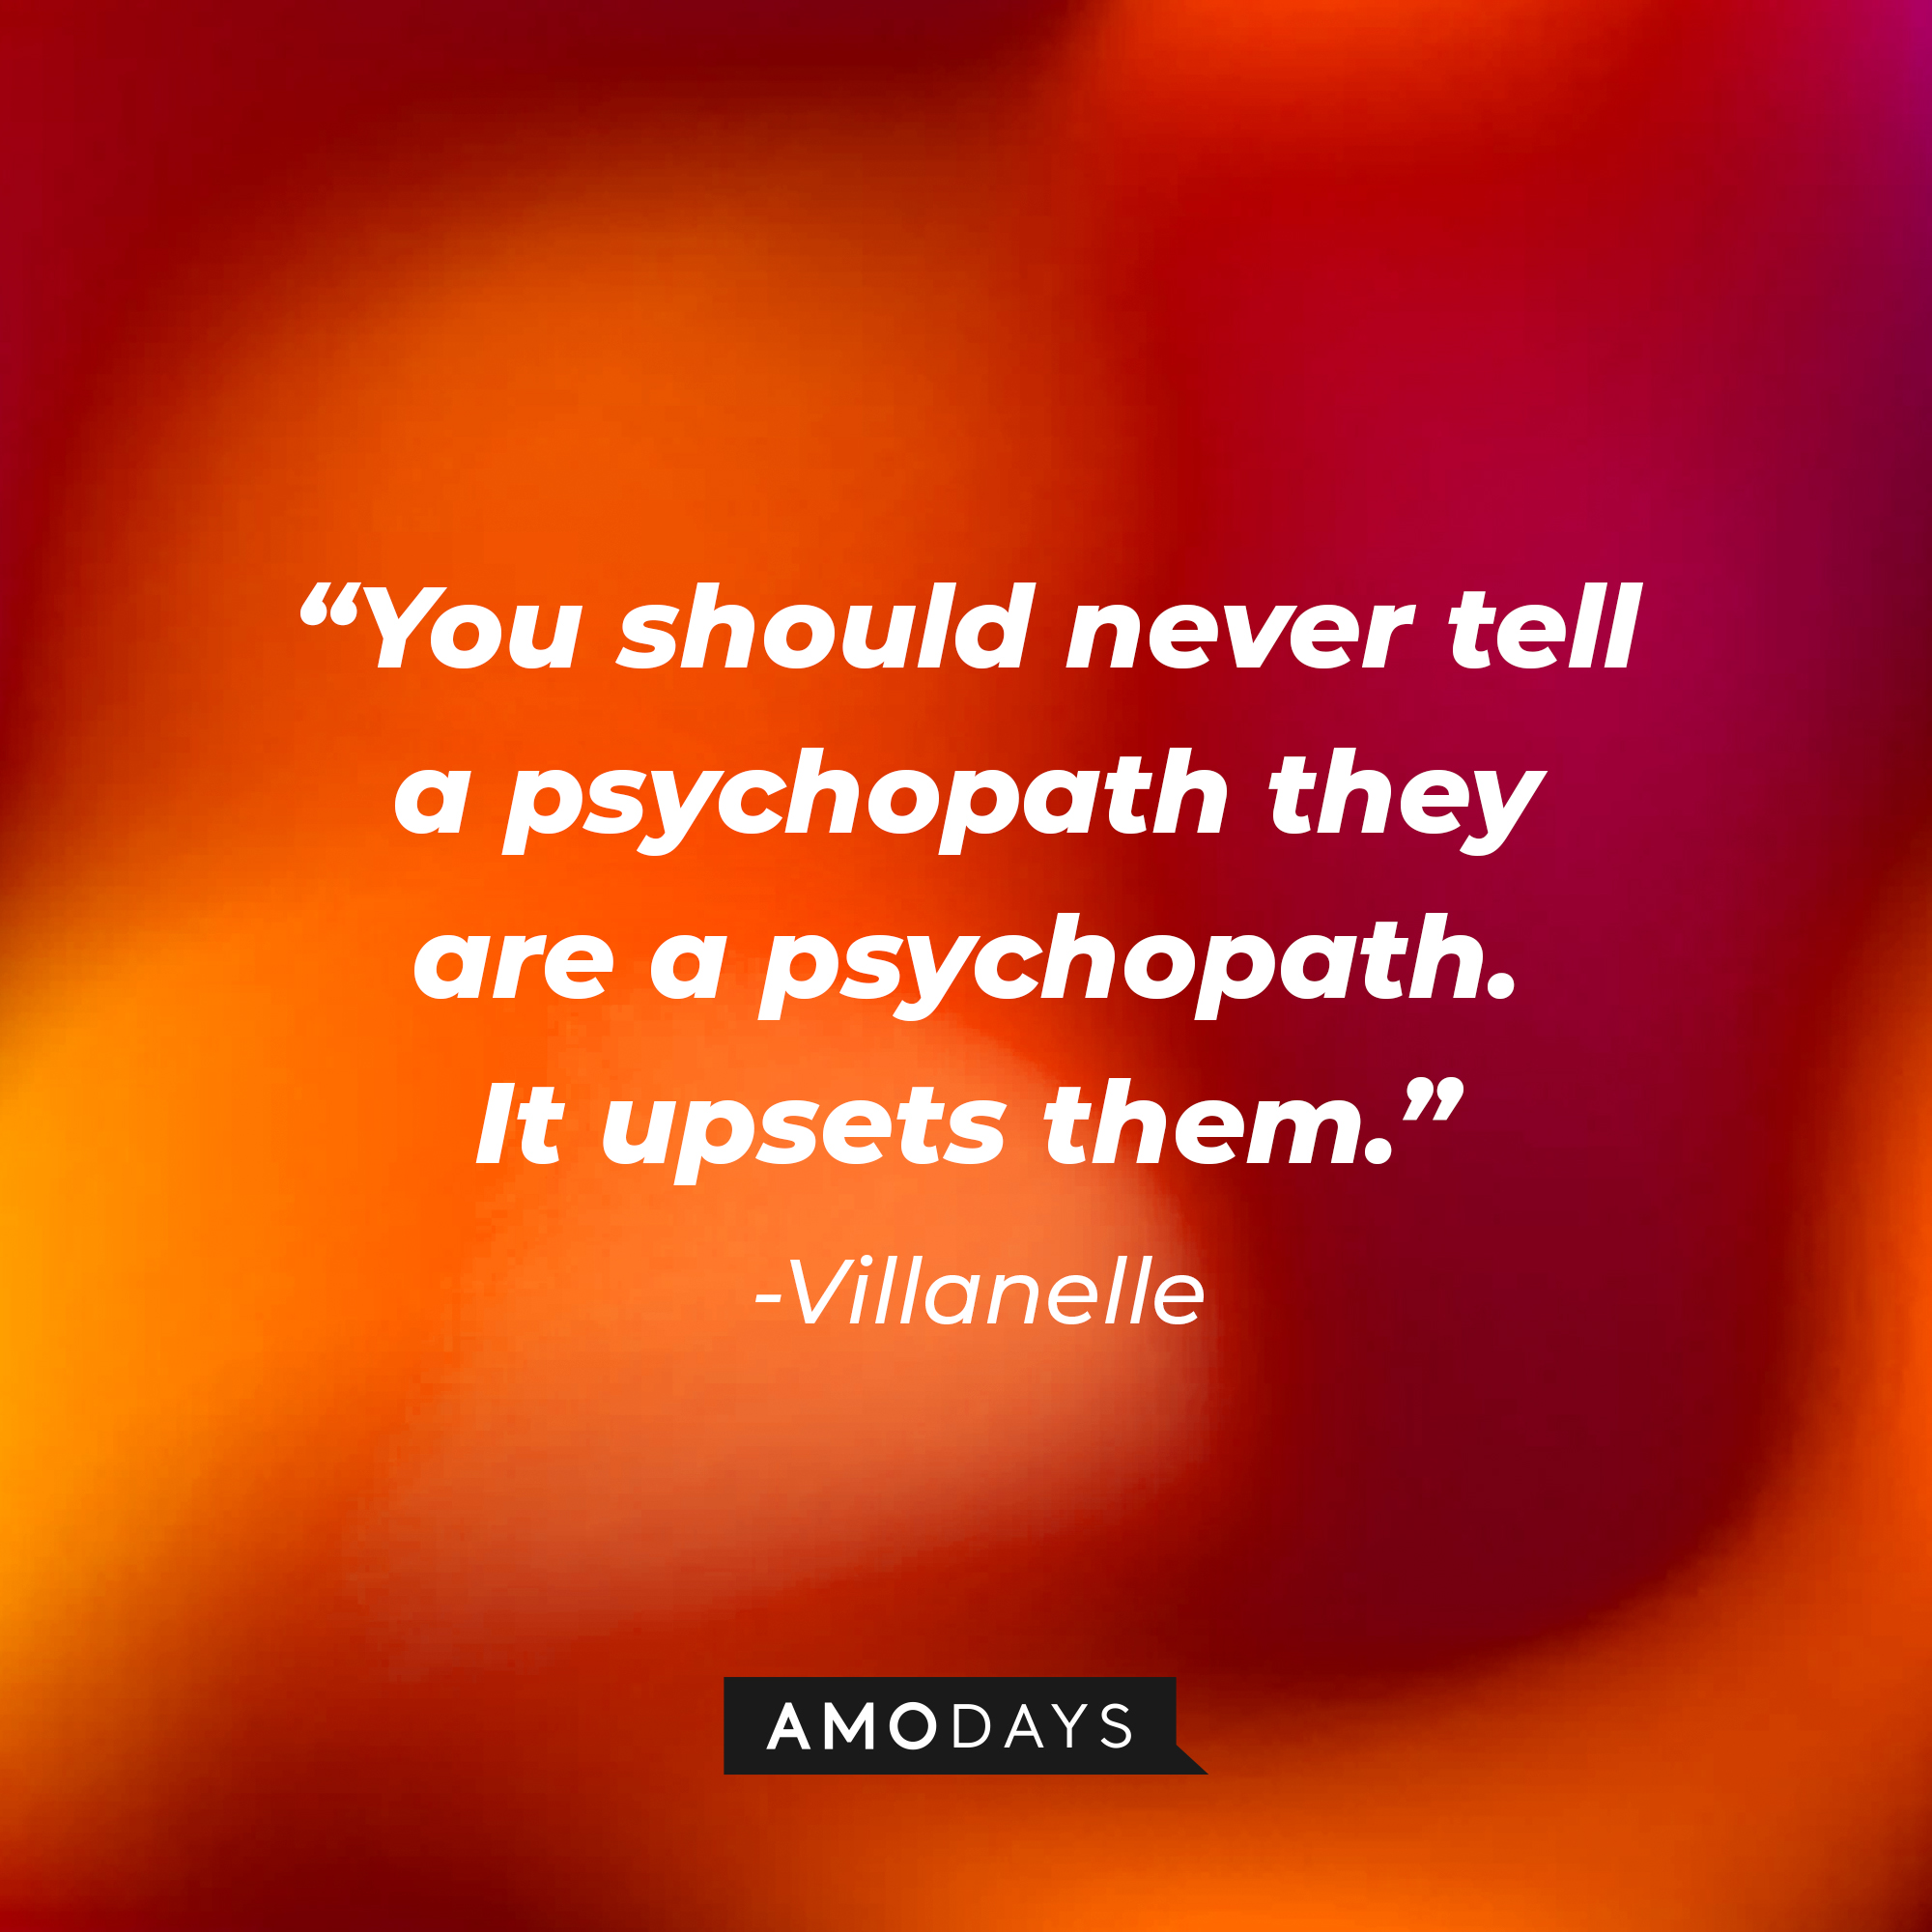 Villanelle‘s quote: “You should never tell a psychopath they are a psychopath. It upsets them.” | Source: AmoDays